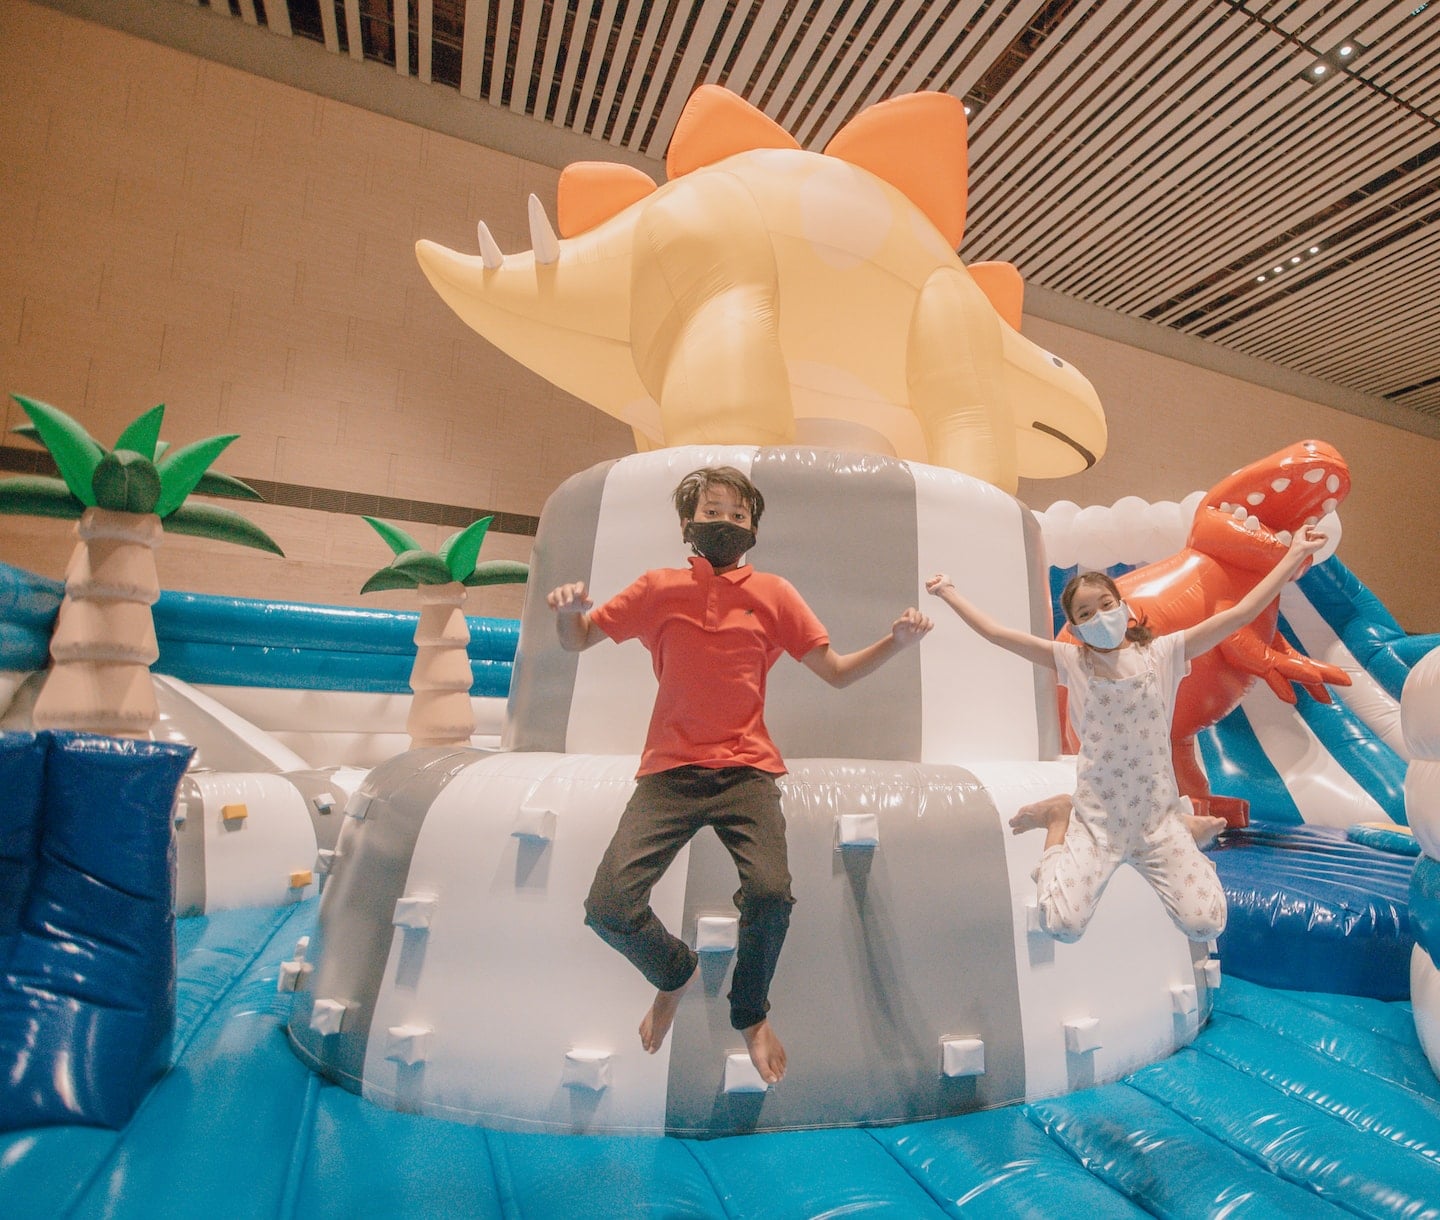 dinosaurs in singapore at the inflatable pop up at Changi airport